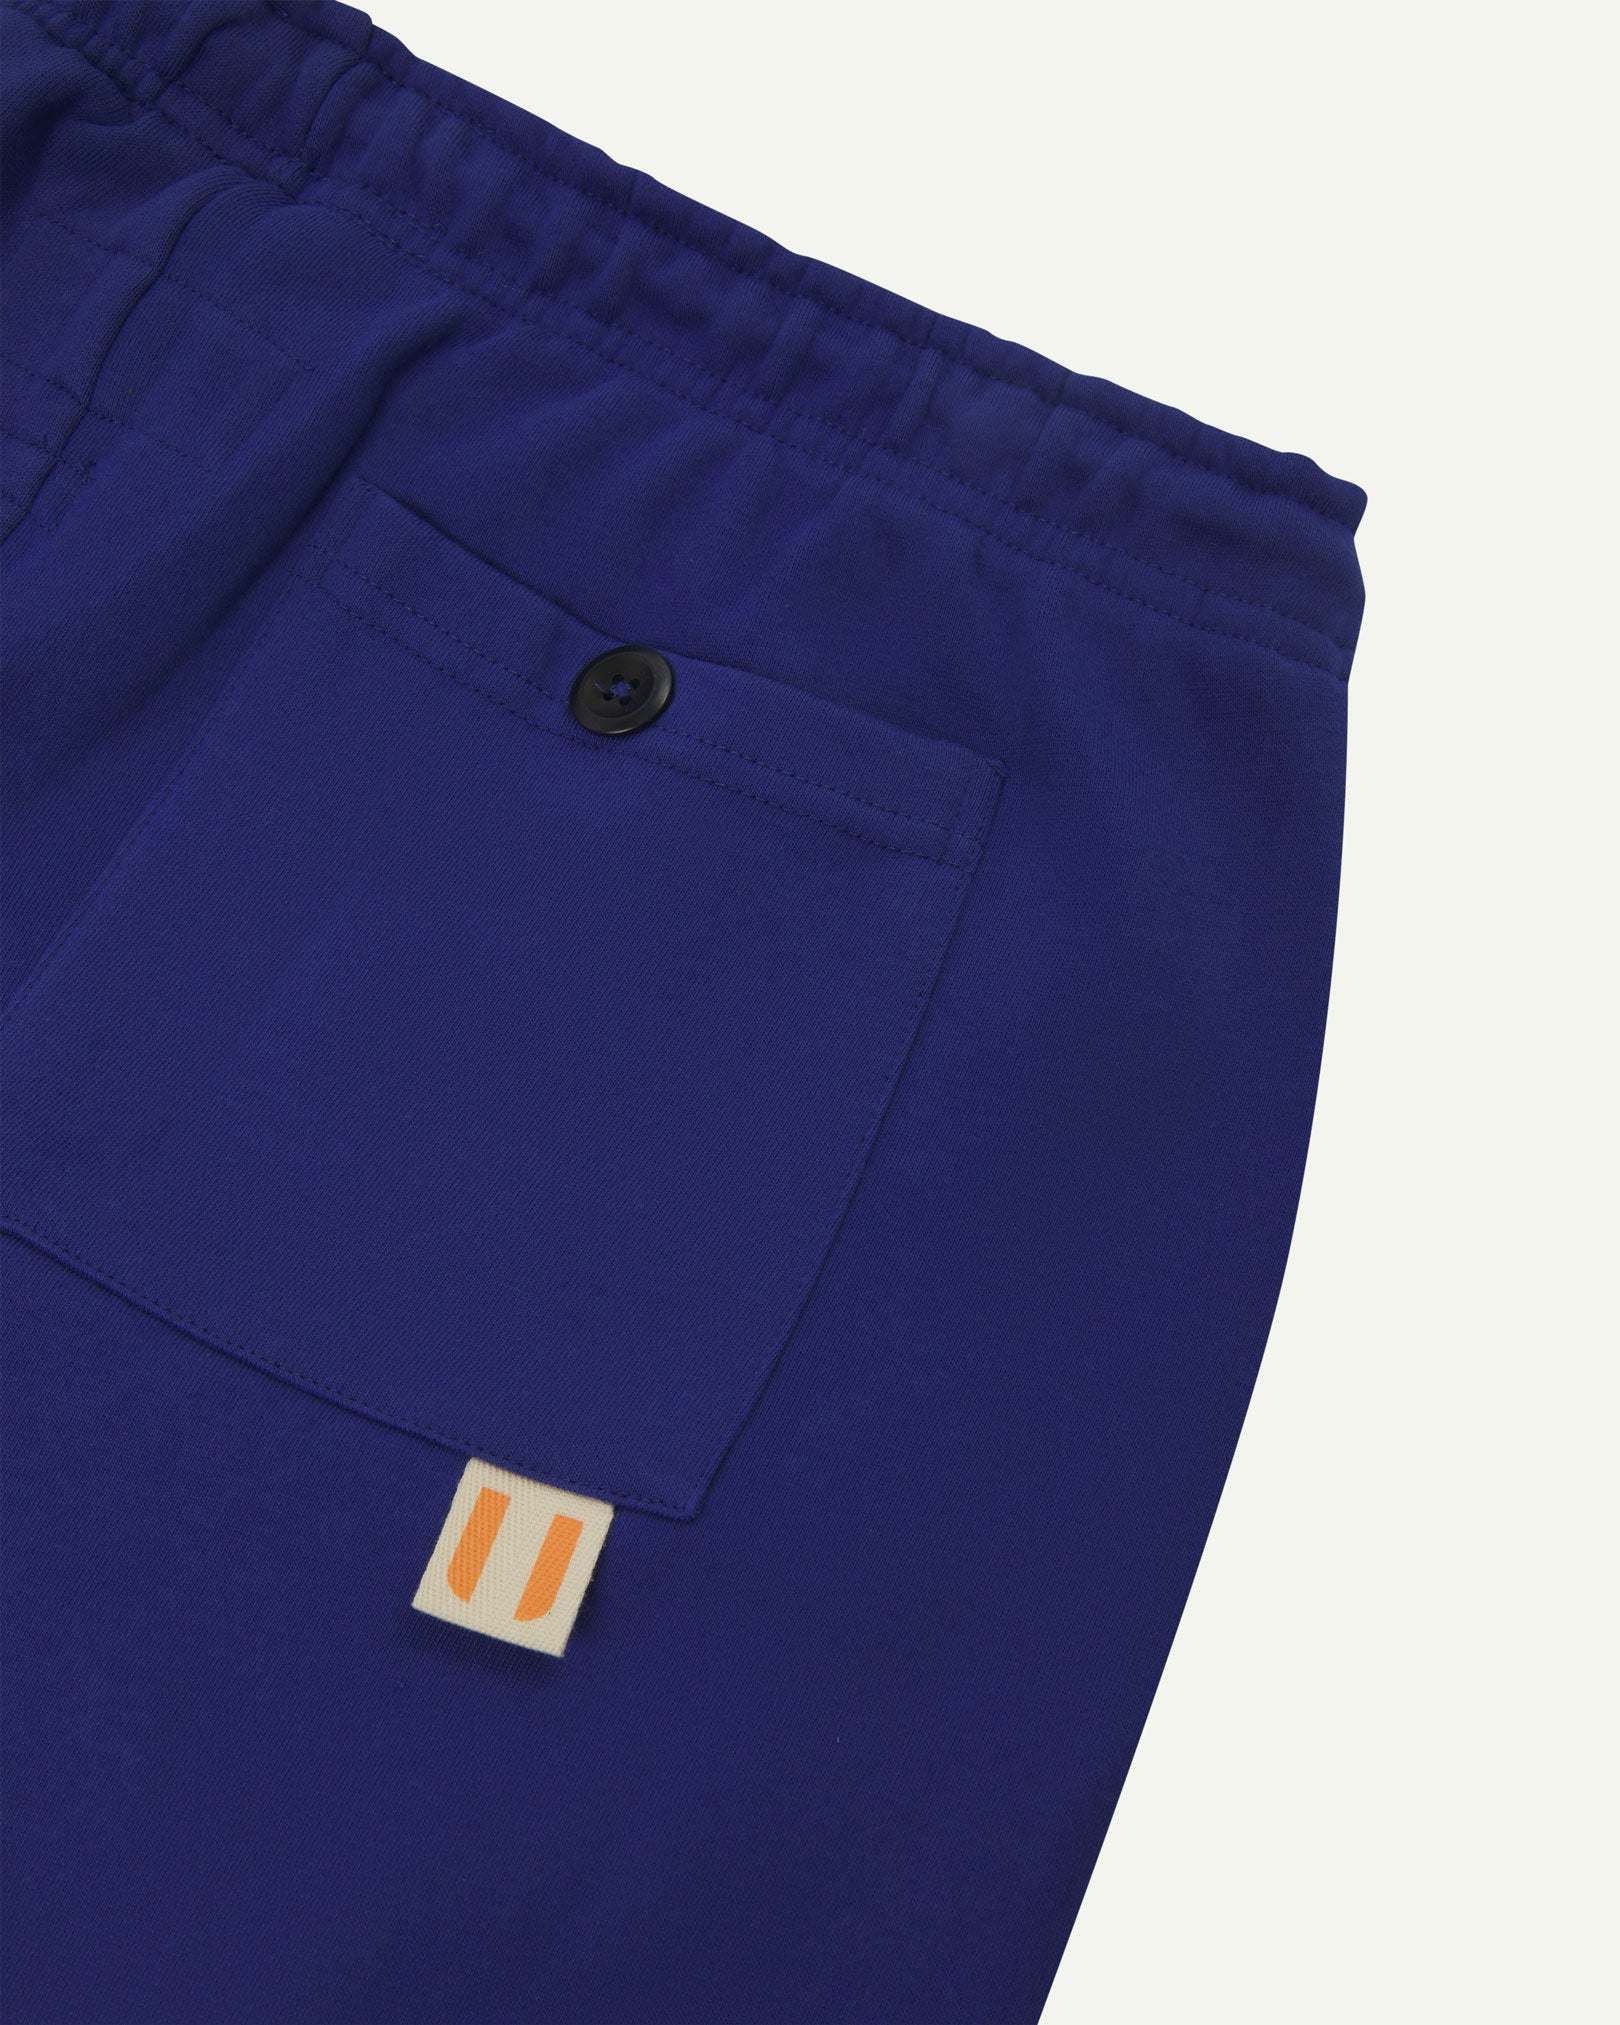 Back close view of ultra blue organic cotton joggers by Uskees showing the buttoned back pocket and logo label.